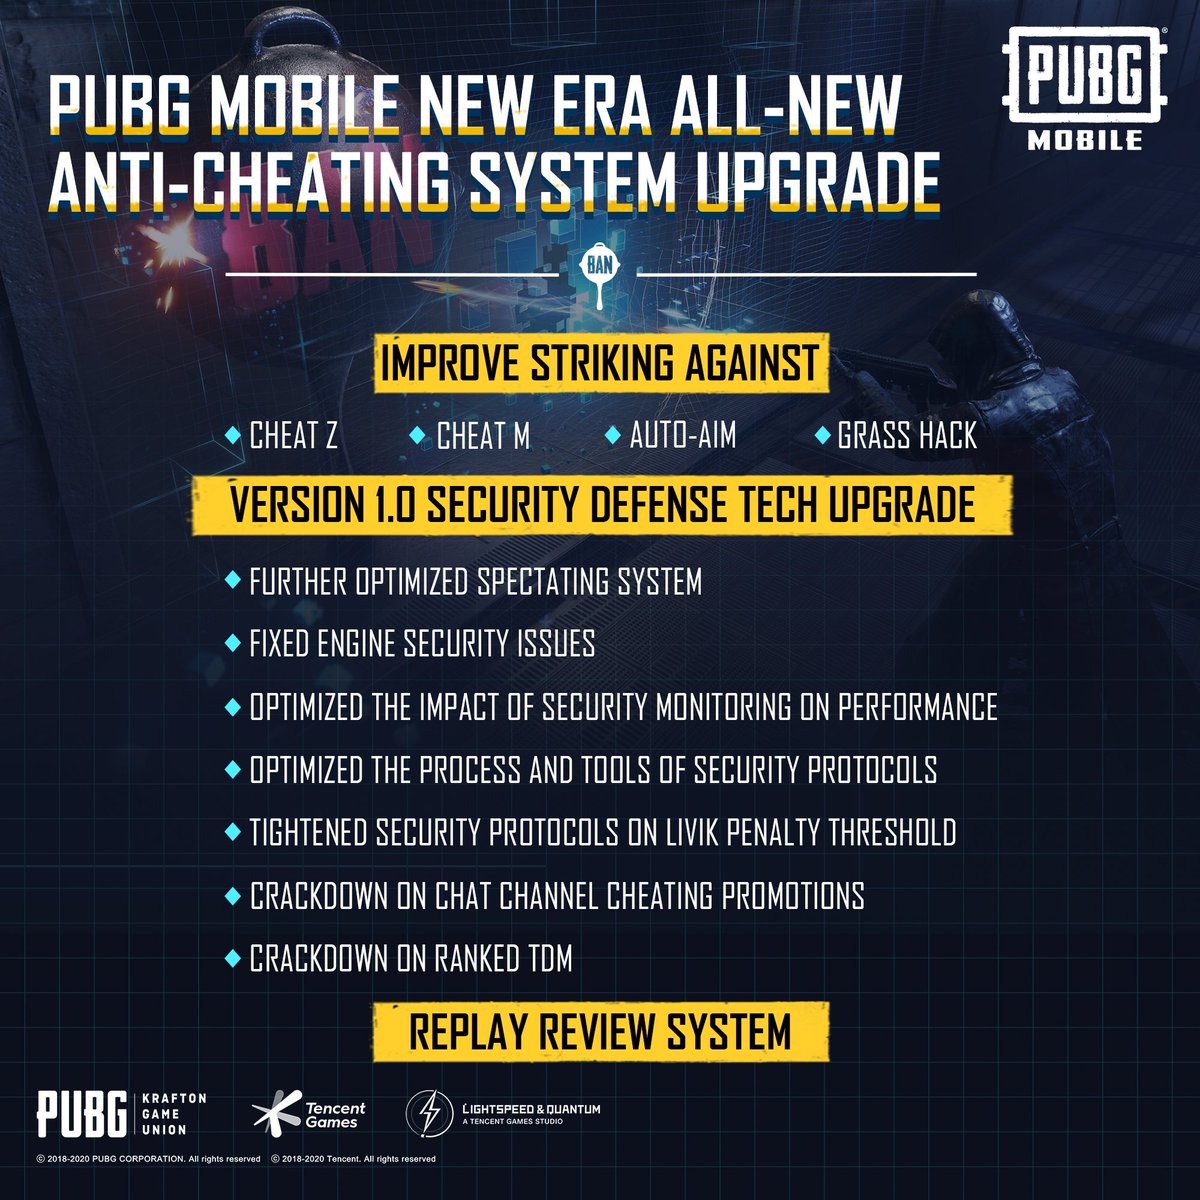 Pubg Mobile Pubg Mobile New Era Is Coming With The All New Anti Cheat System Upgrade We Will Make Sure All The Cheaters Get The Ban Pan They Deserve T Co 3lbsqcrztp